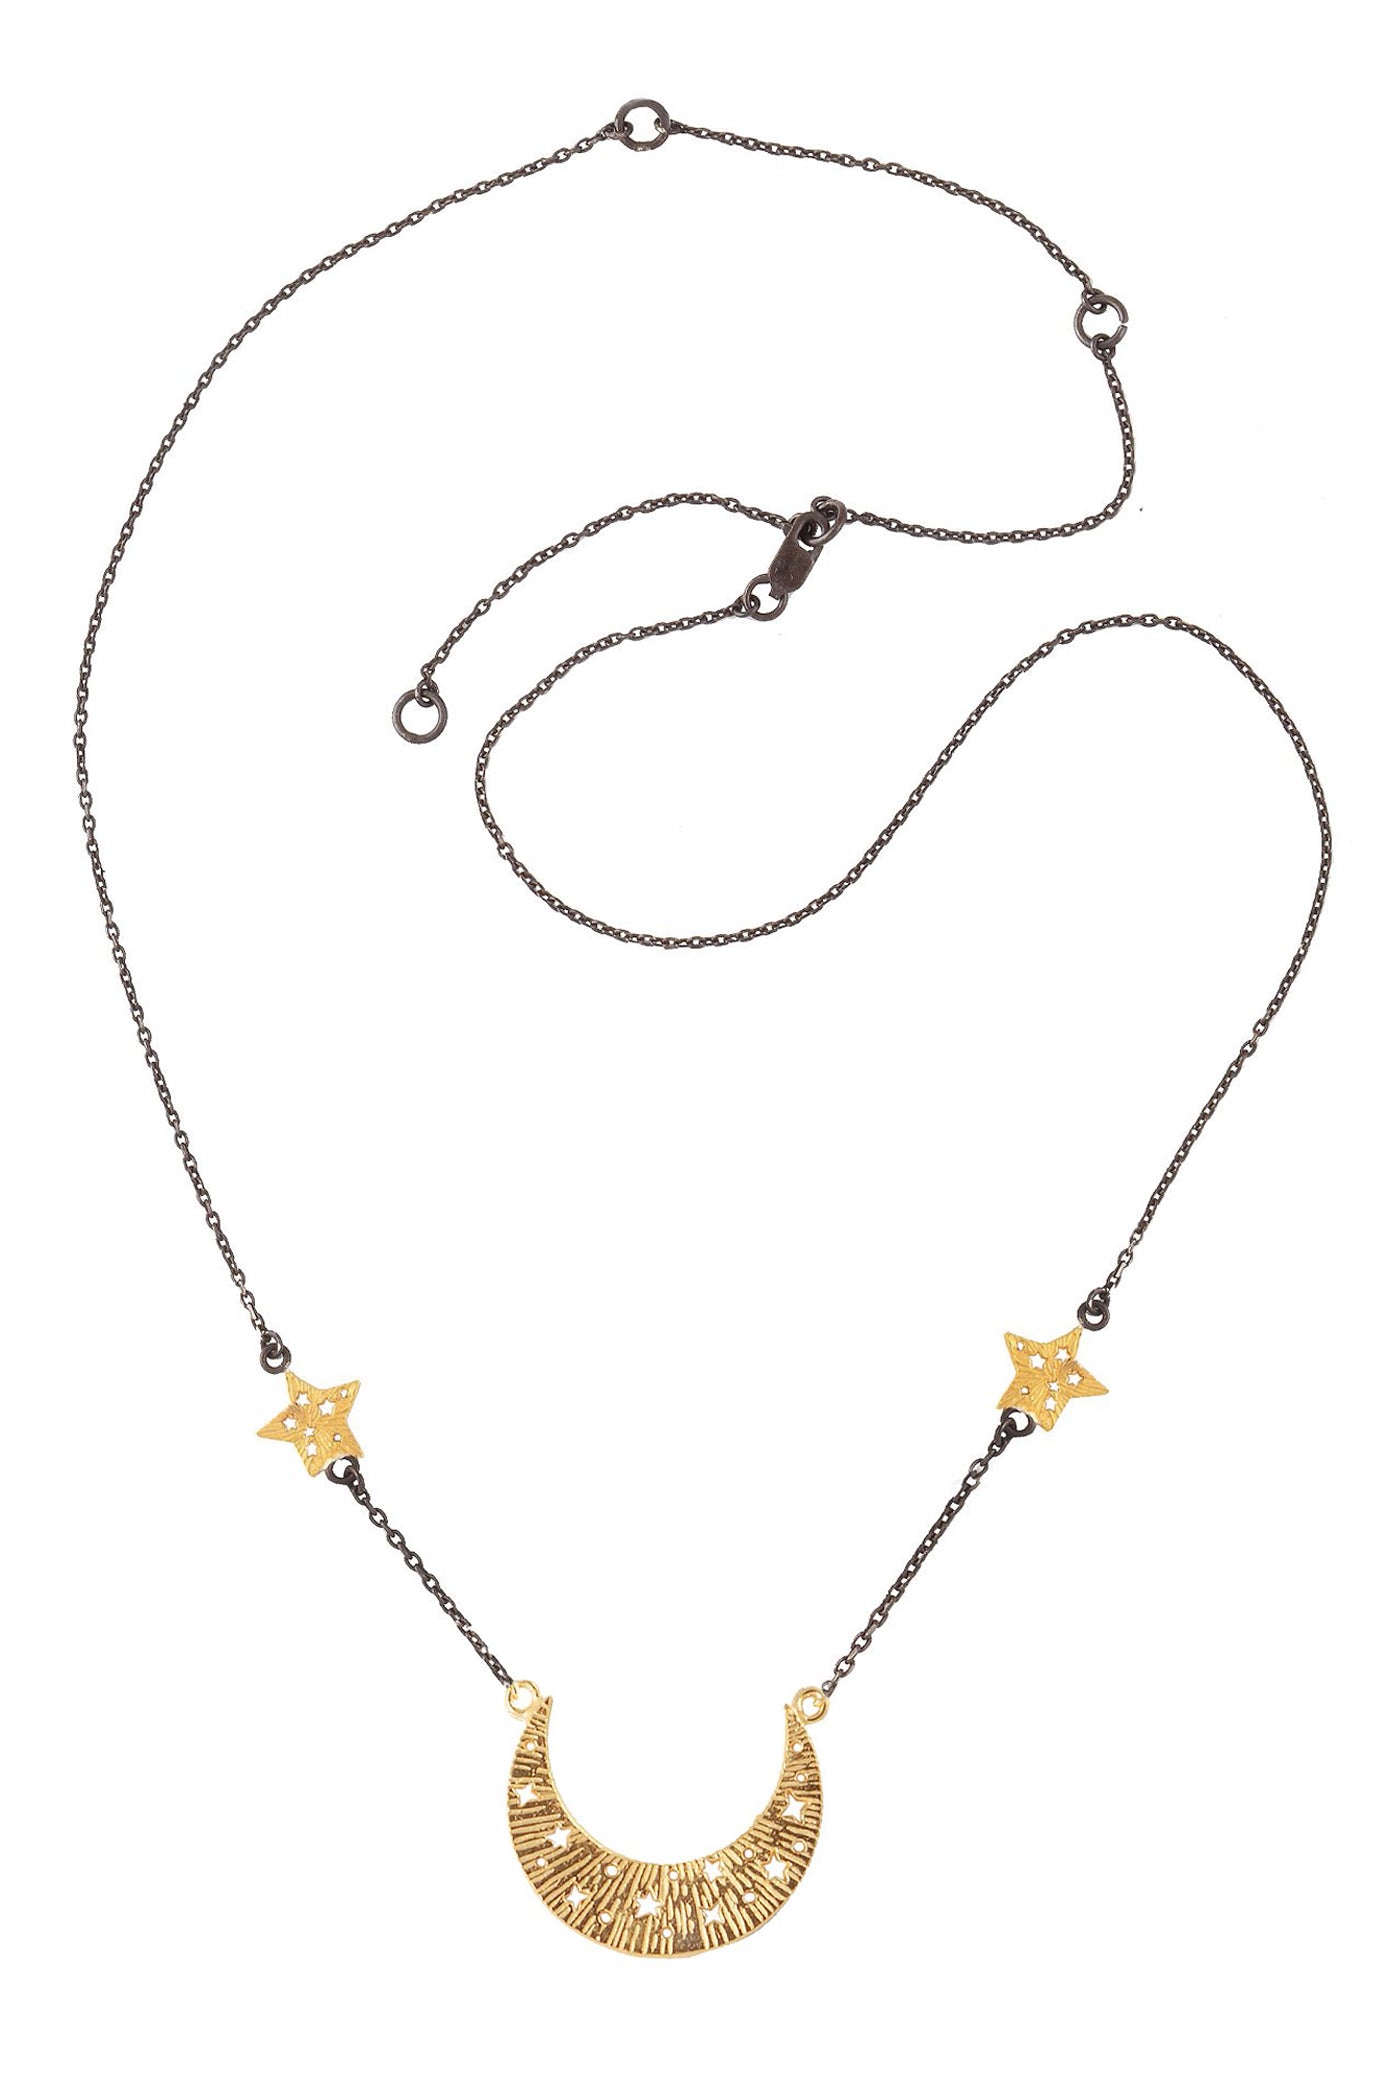 Moon swing with 2 stars on the chain necklace. Silver, gold-plated, oxidized